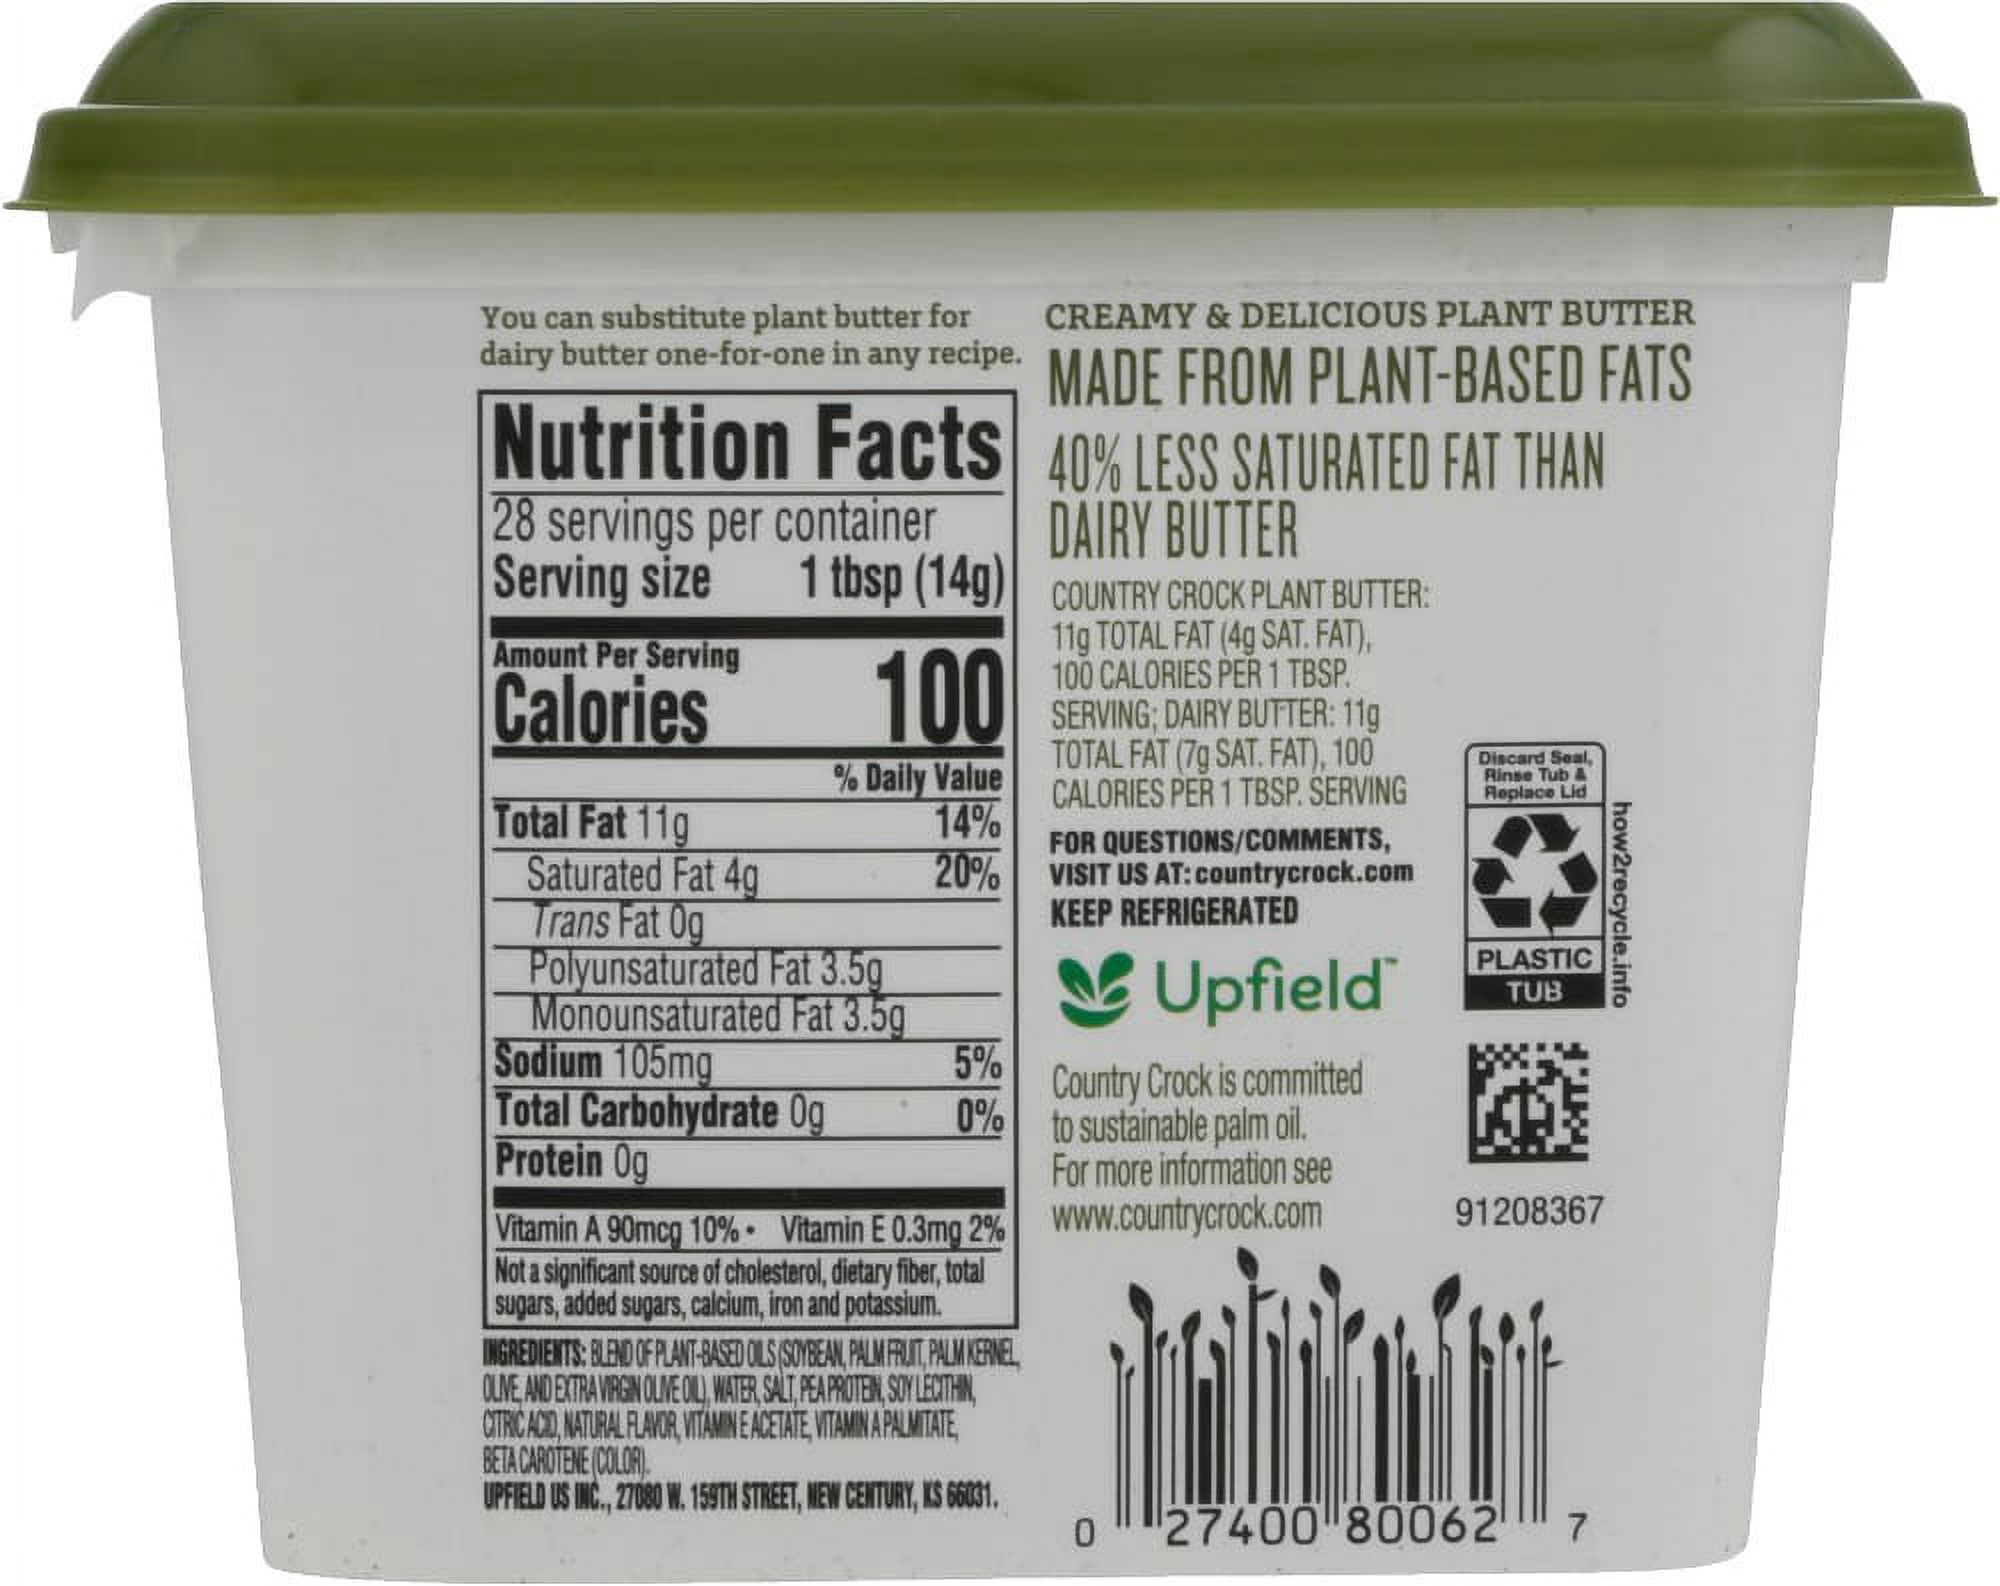 Country Crock Plant Butter with Olive Oil, 14 oz Tub (Refrigerated) - image 4 of 8